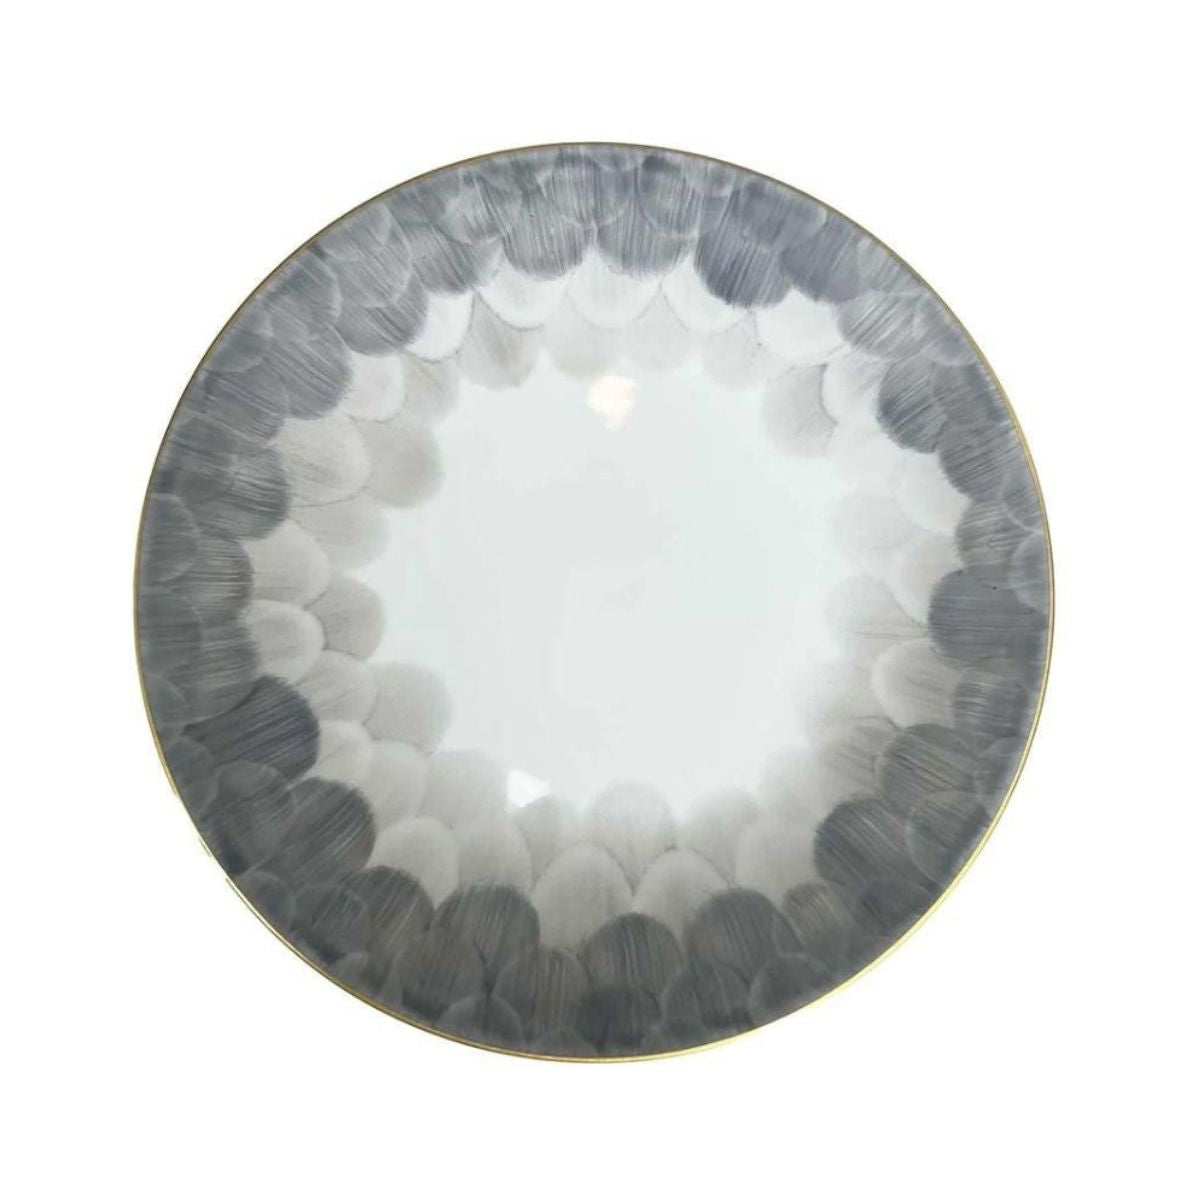 Marie Daâge Cercle D'Écailles Coupe Dinner Plate, Taupe & Silver-Bespoke Designs